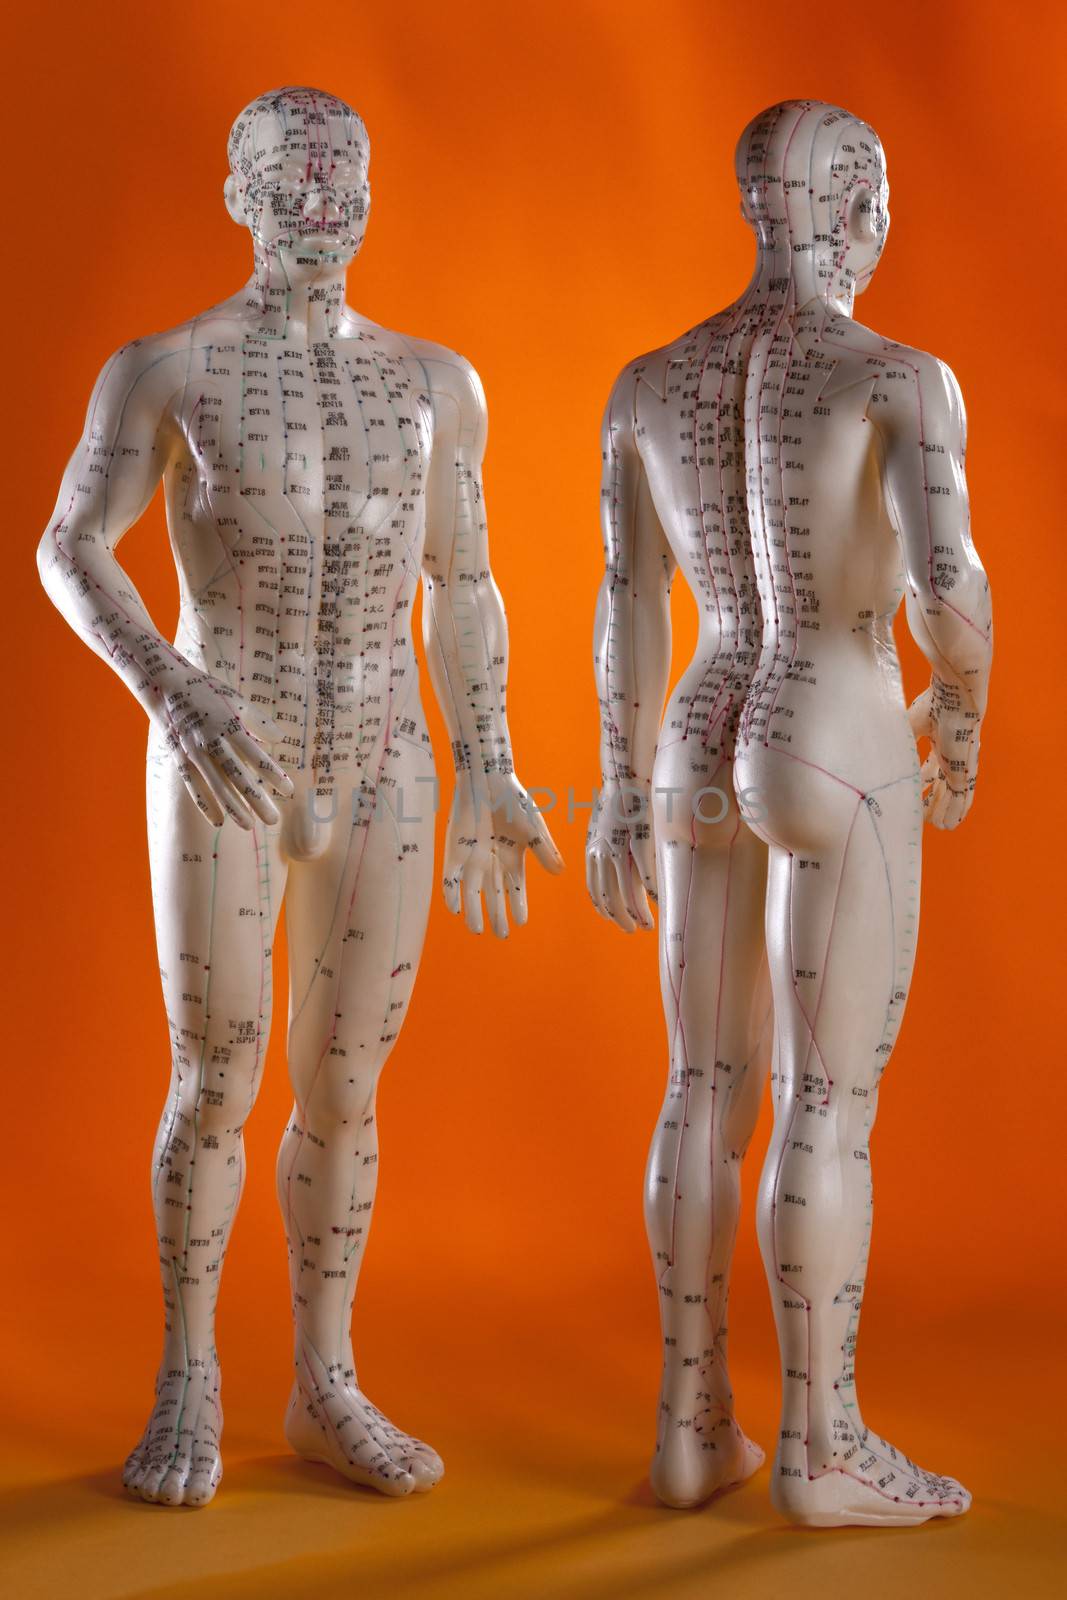 Acupuncture is a system of complementary medicine that involves pricking the skin or tissues with needles. It is used to alleviate pain and to treat various physical, mental, and emotional conditions. Originating in ancient China, acupuncture is now widely practiced in the West.